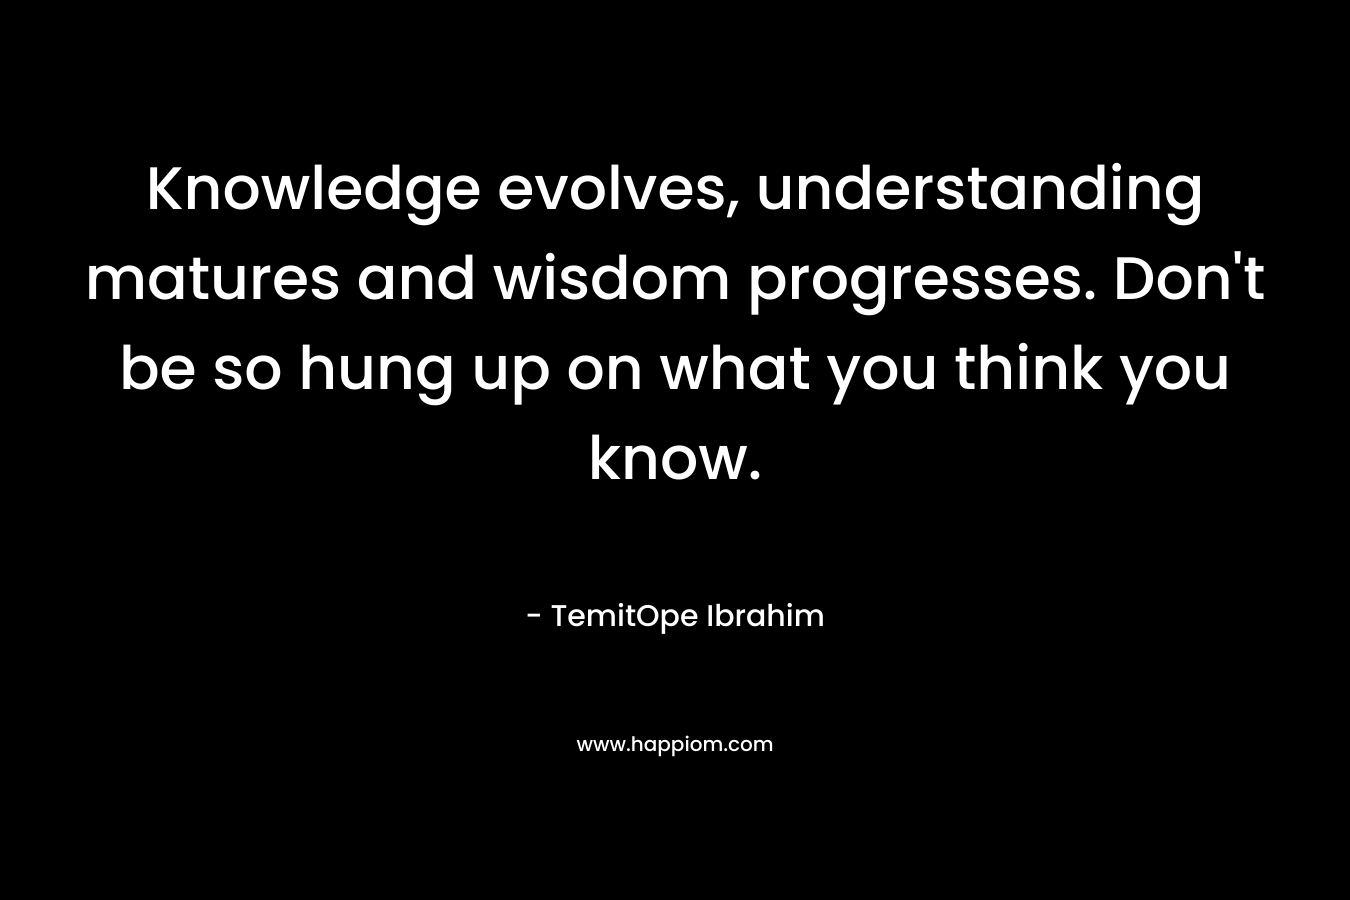 Knowledge evolves, understanding matures and wisdom progresses. Don’t be so hung up on what you think you know. – TemitOpe Ibrahim